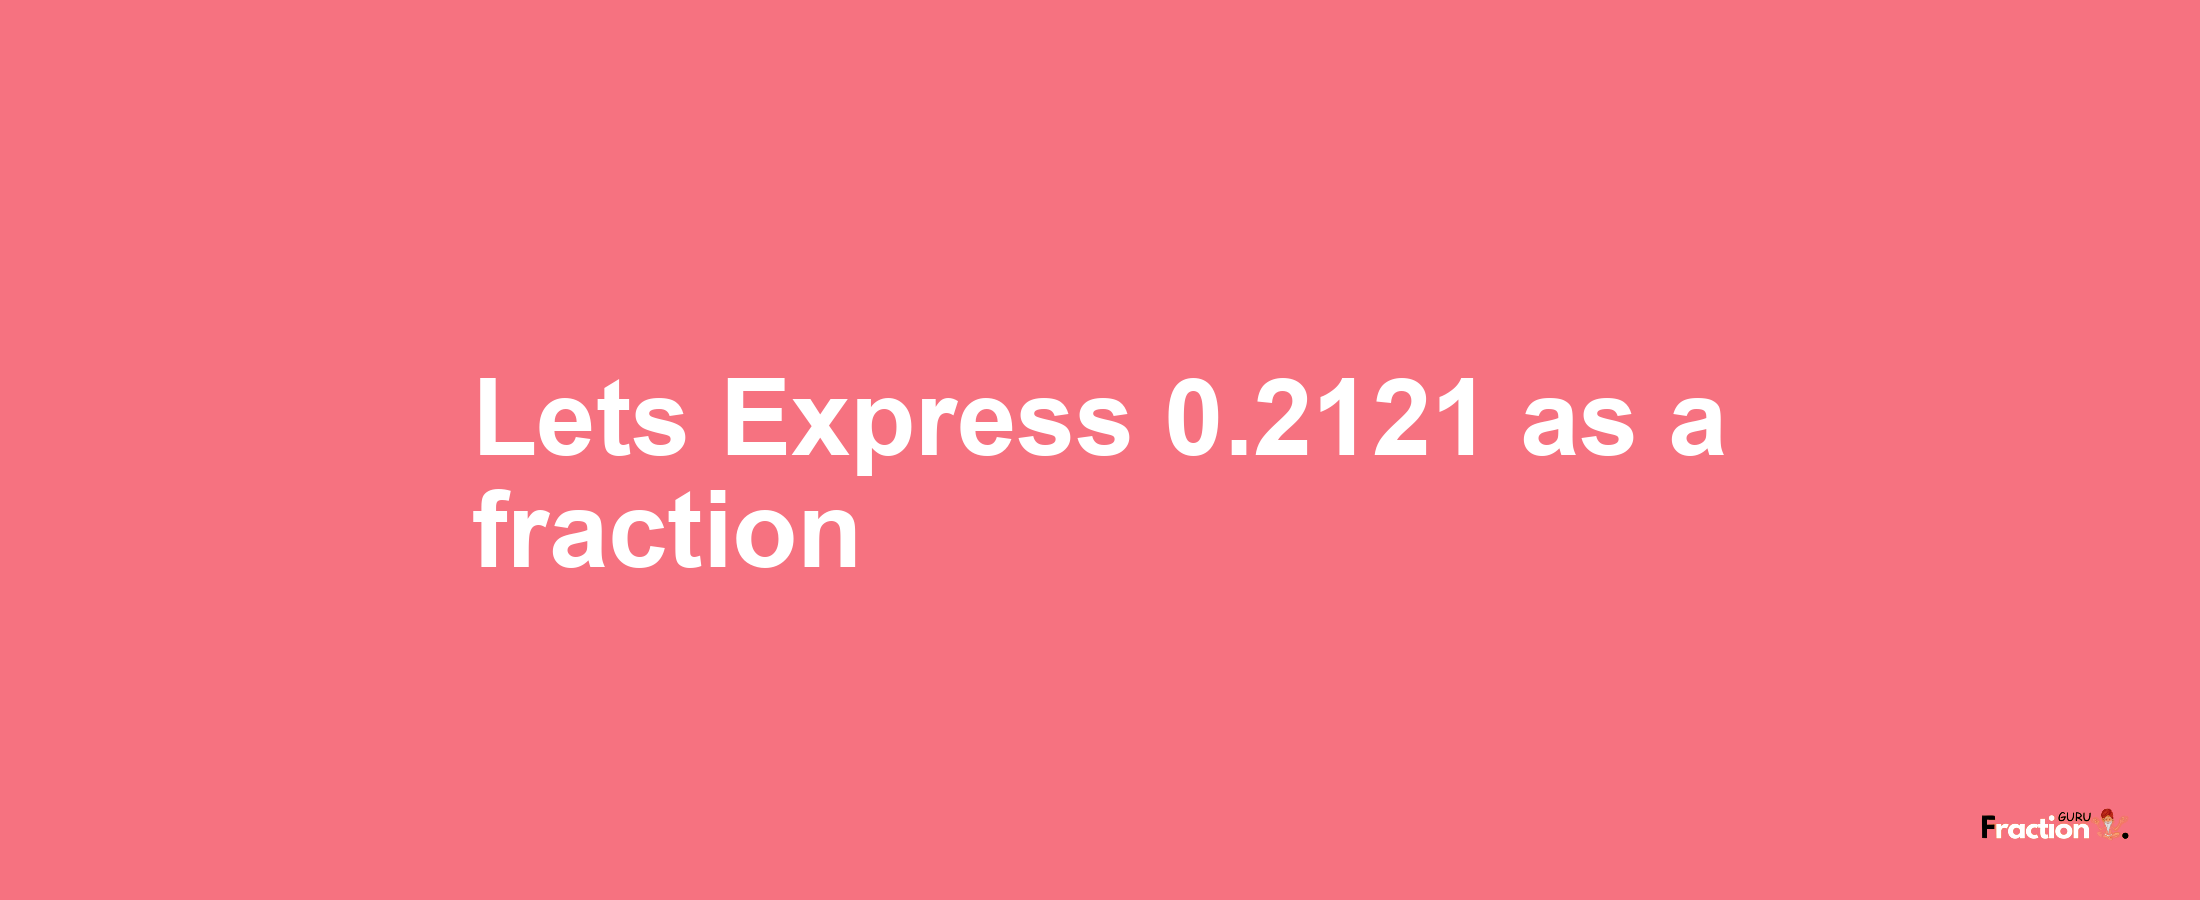 Lets Express 0.2121 as afraction